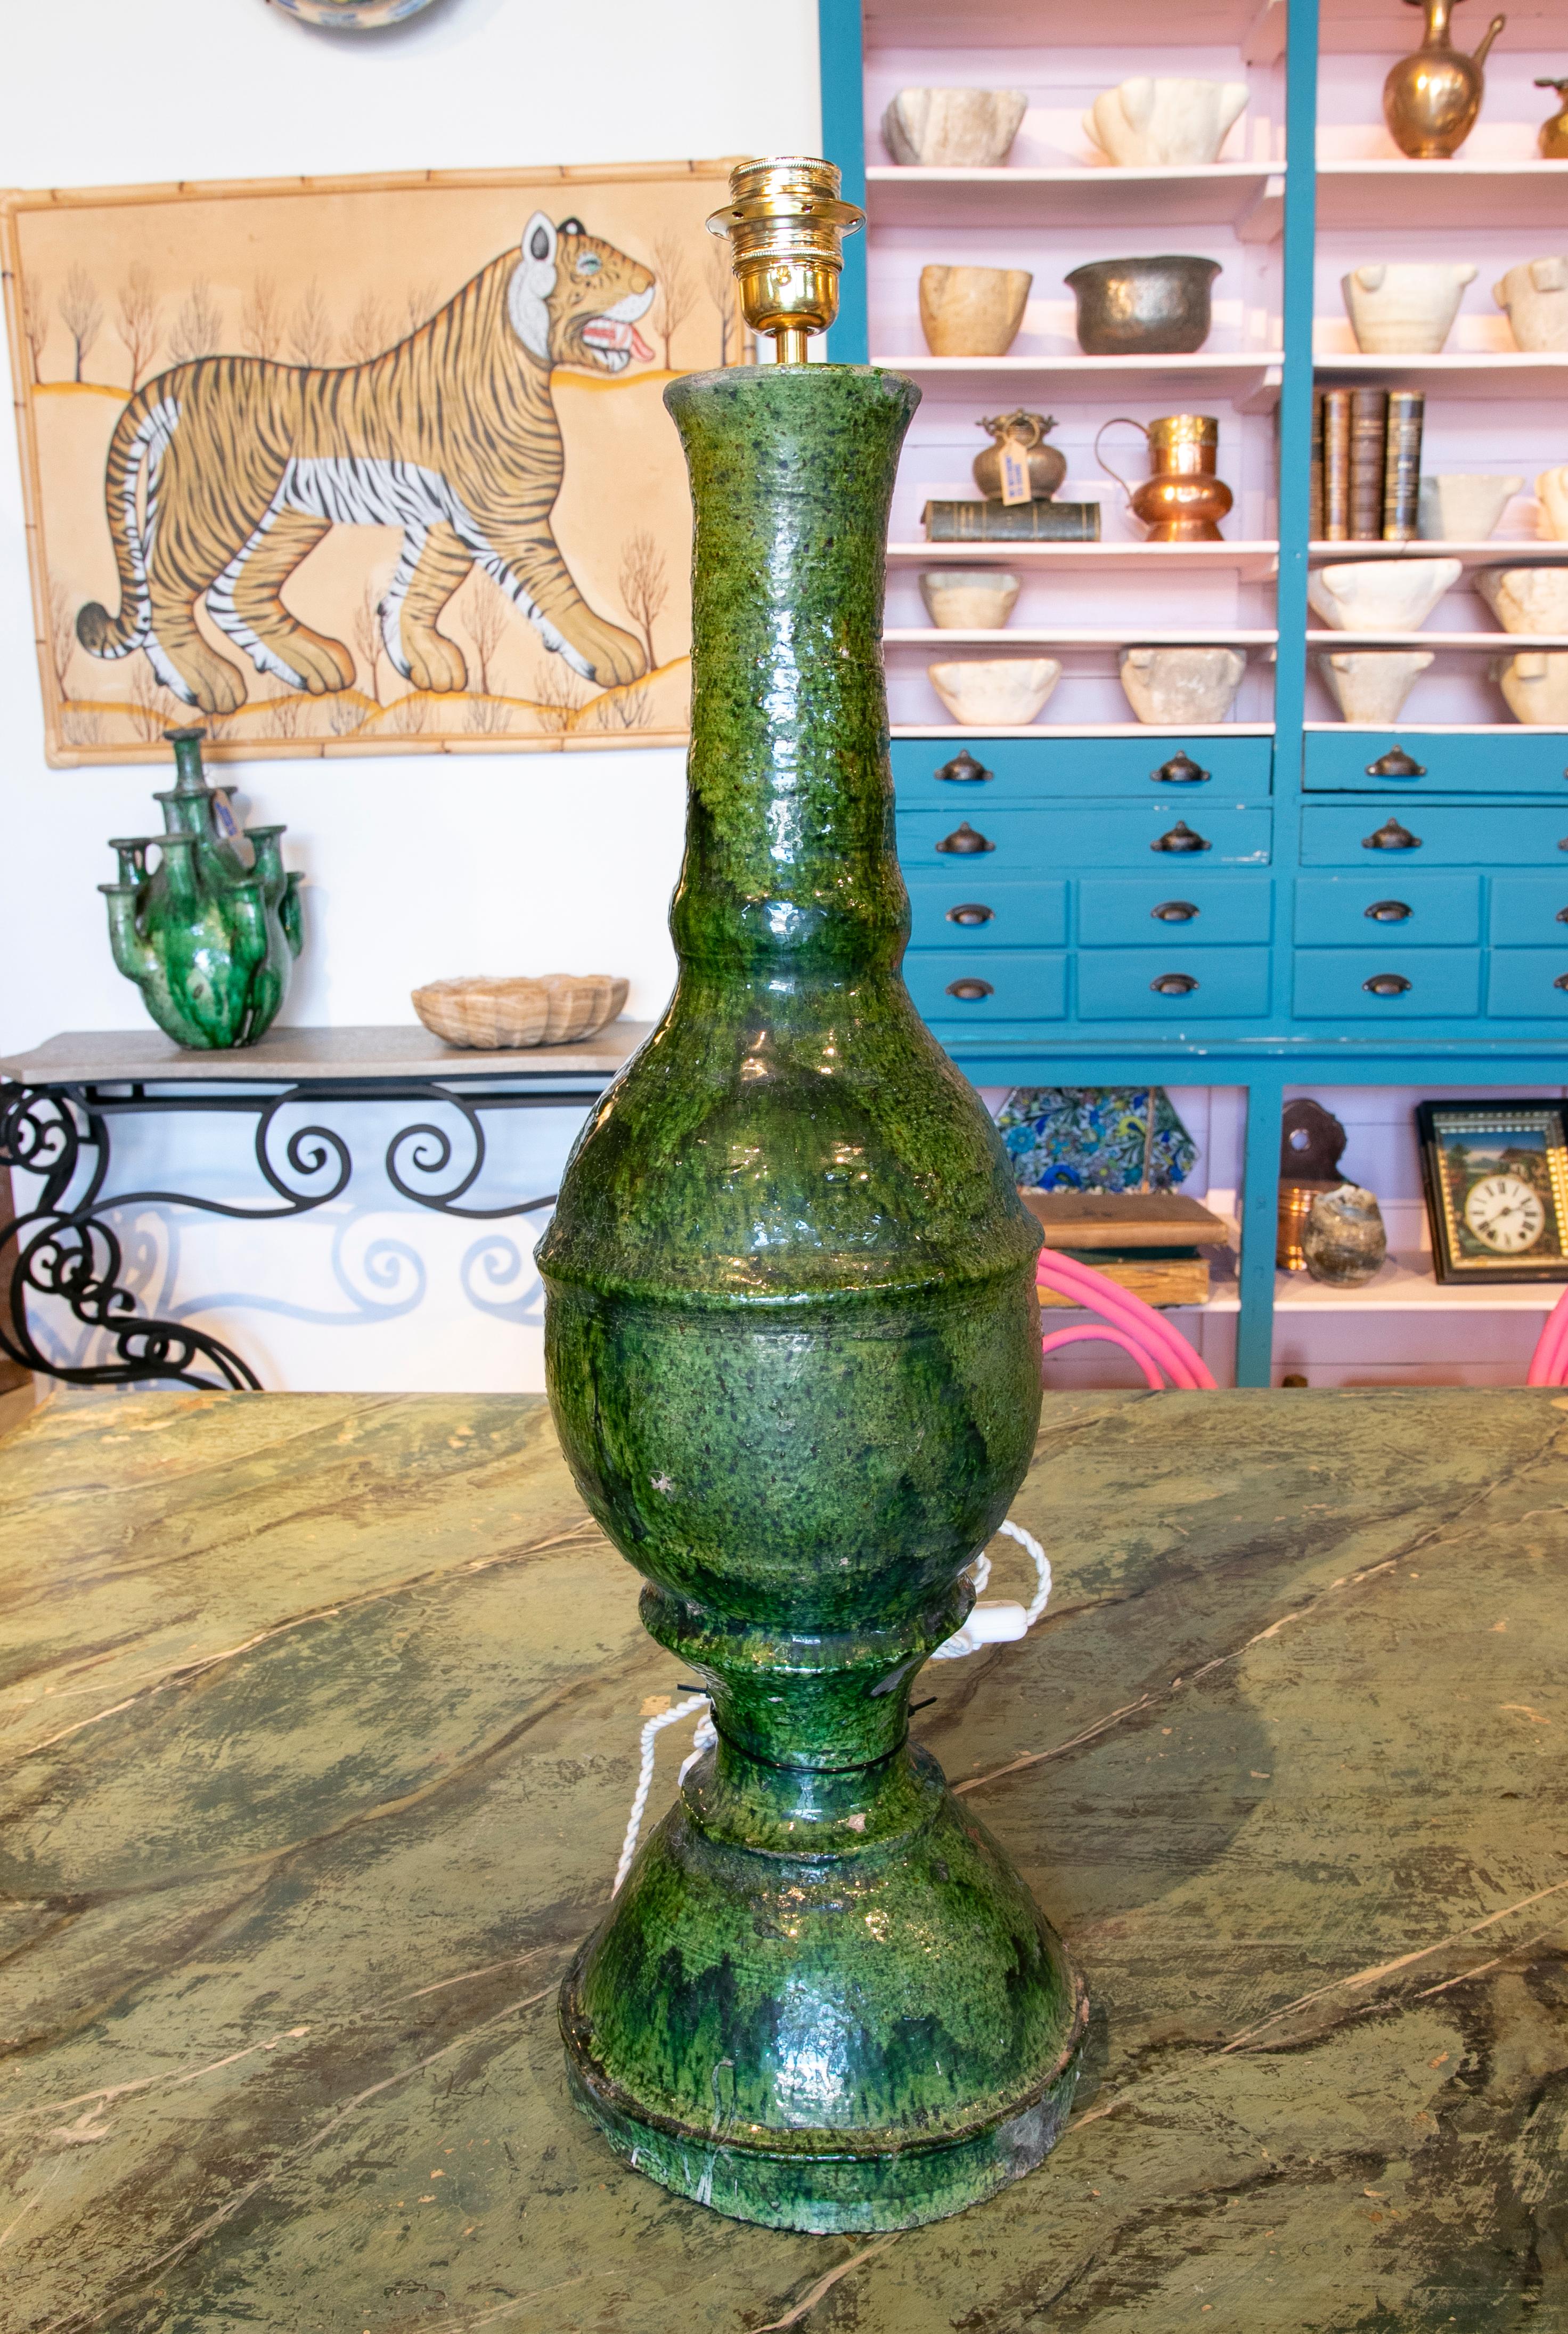 Green glazed ceramic table lamp from the 1990ies with white cord and golden socket.